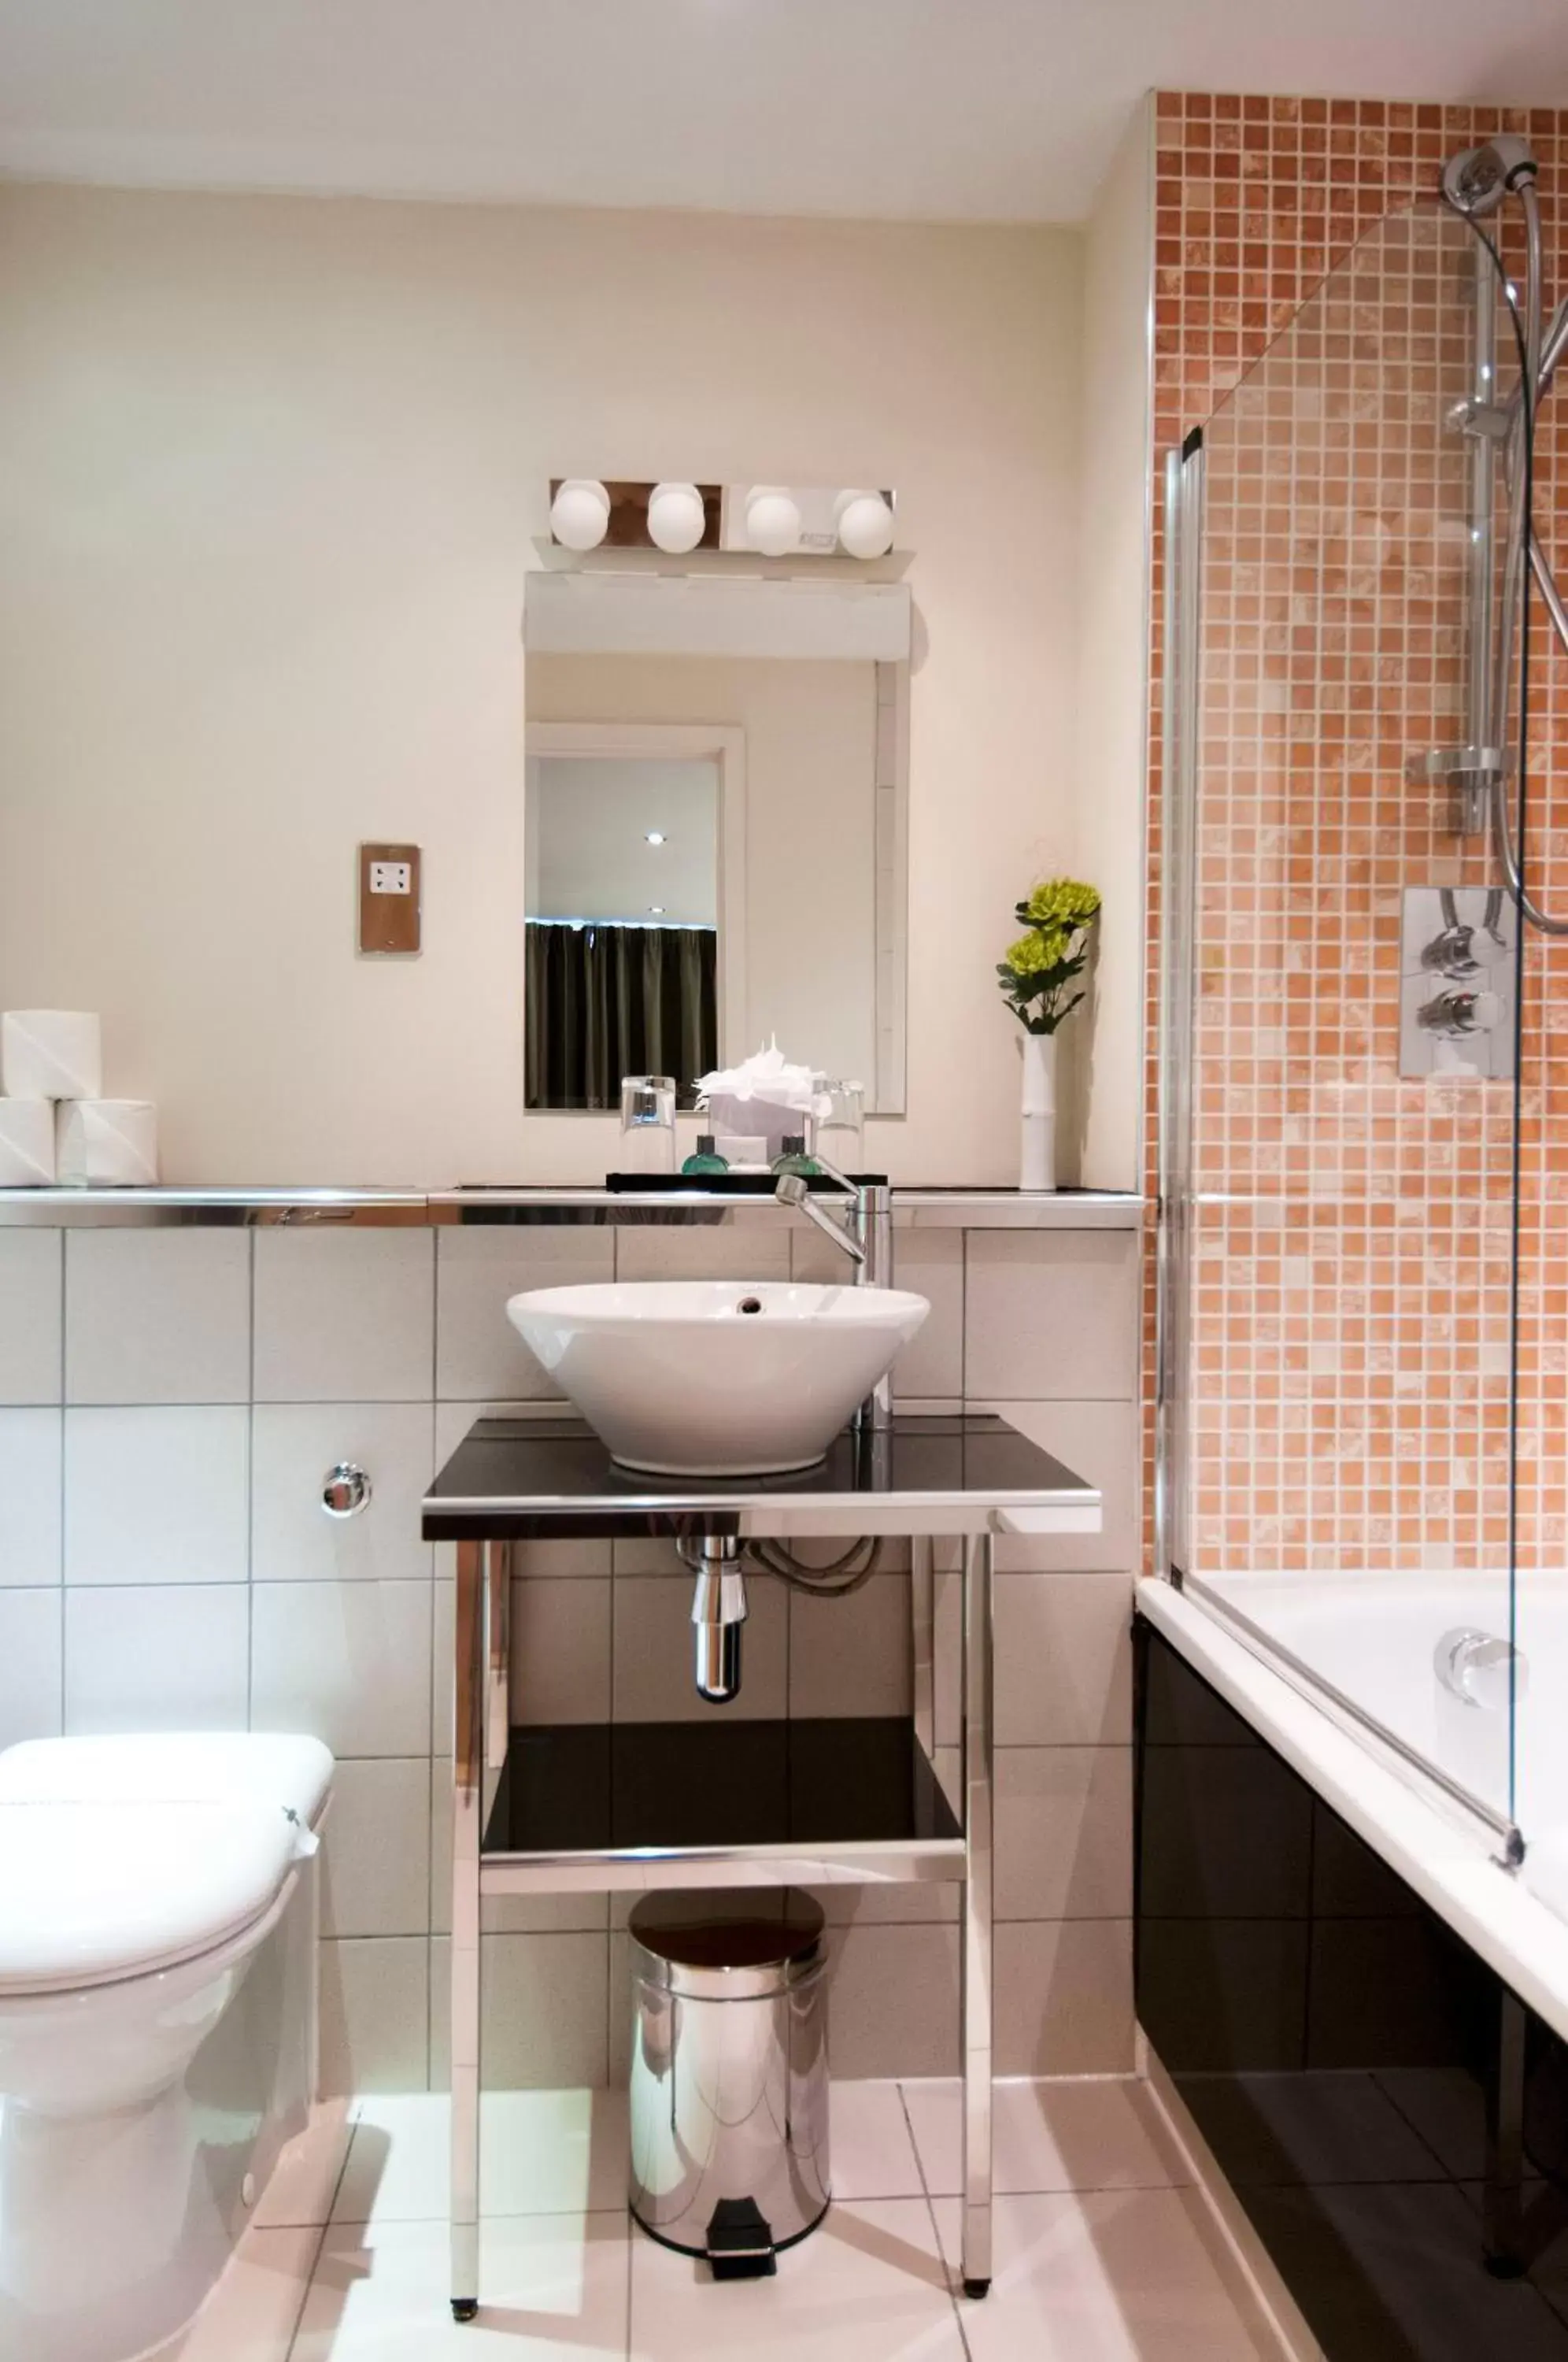 Bathroom in Grand Plaza Serviced Apartments